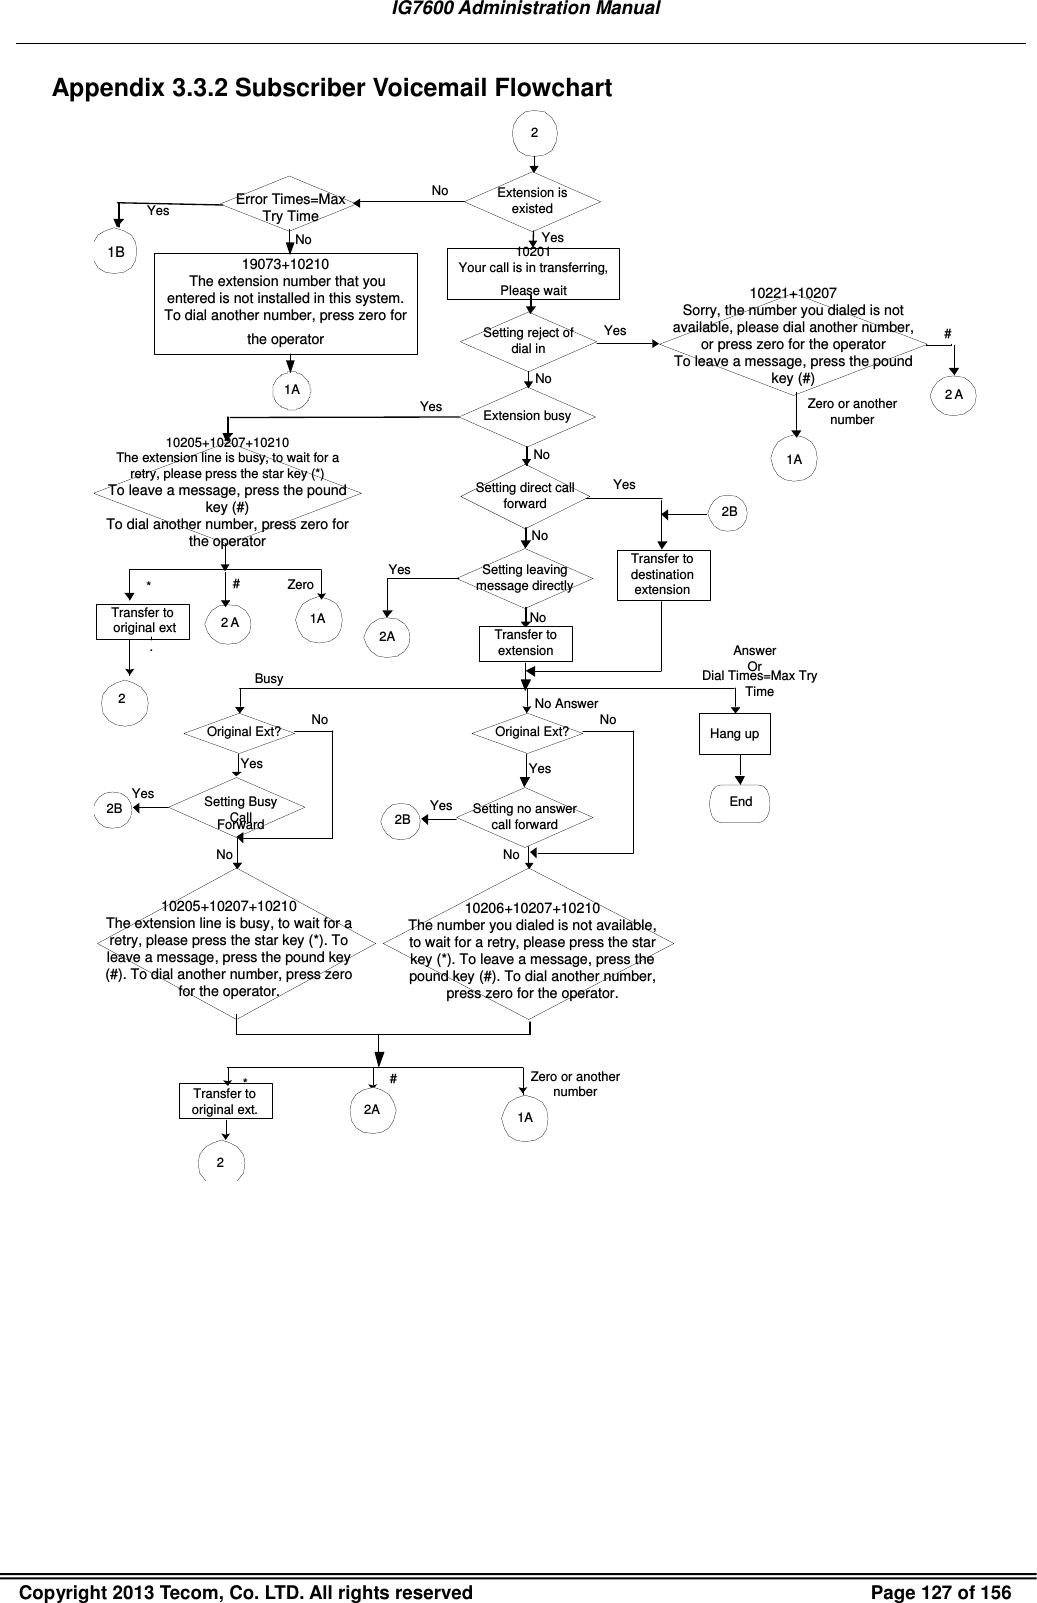   IG7600 Administration Manual  Copyright 2013 Tecom, Co. LTD. All rights reserved  Page 127 of 156 Appendix 3.3.2 Subscriber Voicemail Flowchart 2NoBusySetting reject of dial inNoYes2AAnswer OrSetting direct call forwardSetting leaving message directlyTransfer to extensionTransfer to destination extensionYesNo AnswerHang upEnd#Zero or anothernumber2BNoYesOriginal Ext?Setting Busy CallForwardNo2BYesNoYesOriginal Ext?Setting no answer call forwardNo2BYes*2A 1ATransfer tooriginal ext.2Dial Times=Max Try TimeYes10205+10207+10210The extension line is busy, to wait for a retry, please press the star key (*). To leave a message, press the pound key (#). To dial another number, press zero for the operator.10206+10207+10210The number you dialed is not available, to wait for a retry, please press the star key (*). To leave a message, press the pound key (#). To dial another number, press zero for the operator.10221+10207Sorry, the number you dialed is not available, please dial another number, or press zero for the operatorTo leave a message, press the pound key (#)#2 AZero or anothernumber1AExtension is existedYesNoExtension busy10205+10207+10210The extension line is busy, to wait for a retry, please press the star key (*)To leave a message, press the pound key (#)To dial another number, press zero for the operatorZero1A#2 ATransfer tooriginal ext.2*YesNoNo10201Your call is in transferring,Please waitYesNo1AError Times=Max Try Time1B 19073+10210 The extension number that you entered is not installed in this system. To dial another number, press zero for the operator 